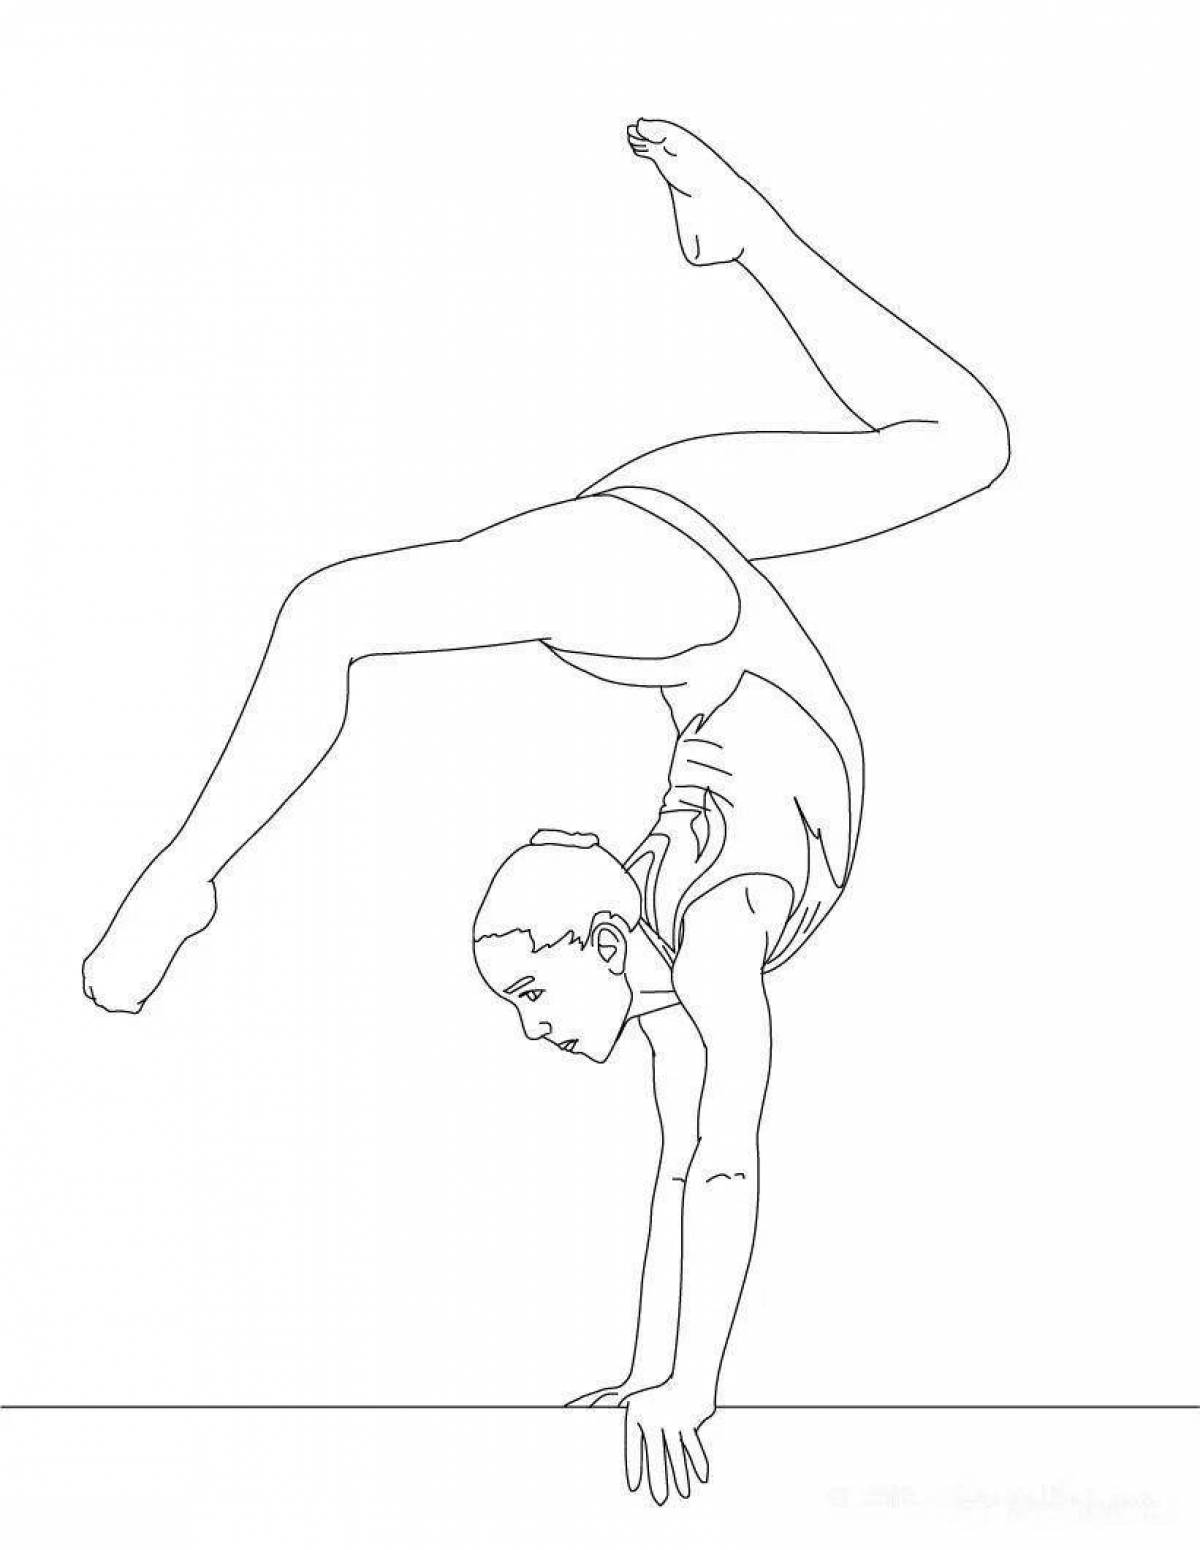 Coloring page graceful gymnast